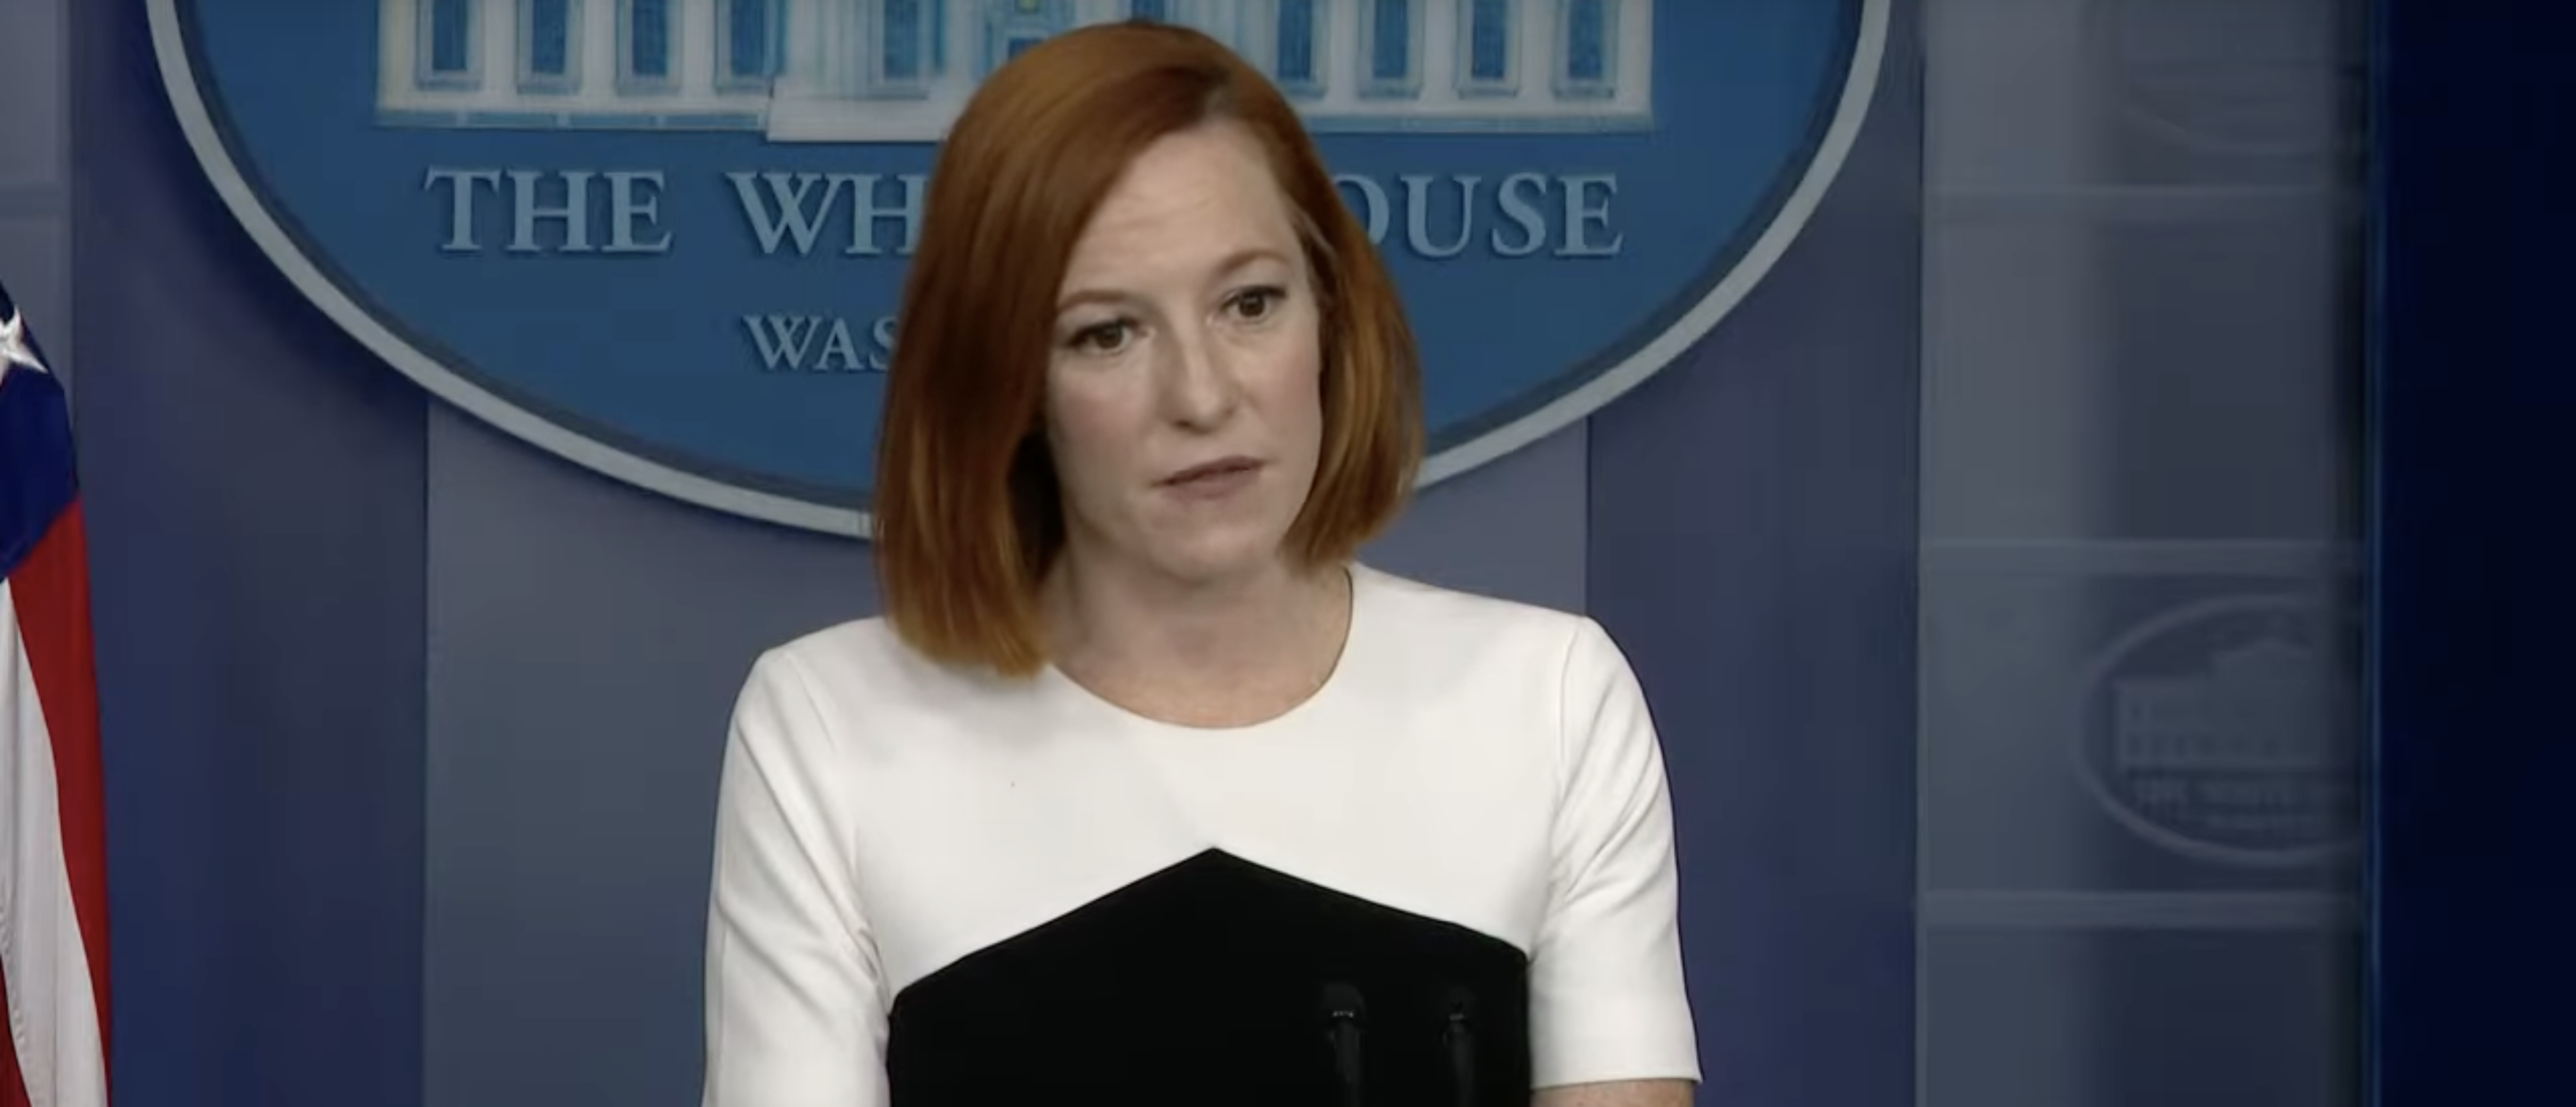 Psaki Gets Heated When Pressed On Hunter Biden’s Ties To China And His ‘Laptop From Hell’